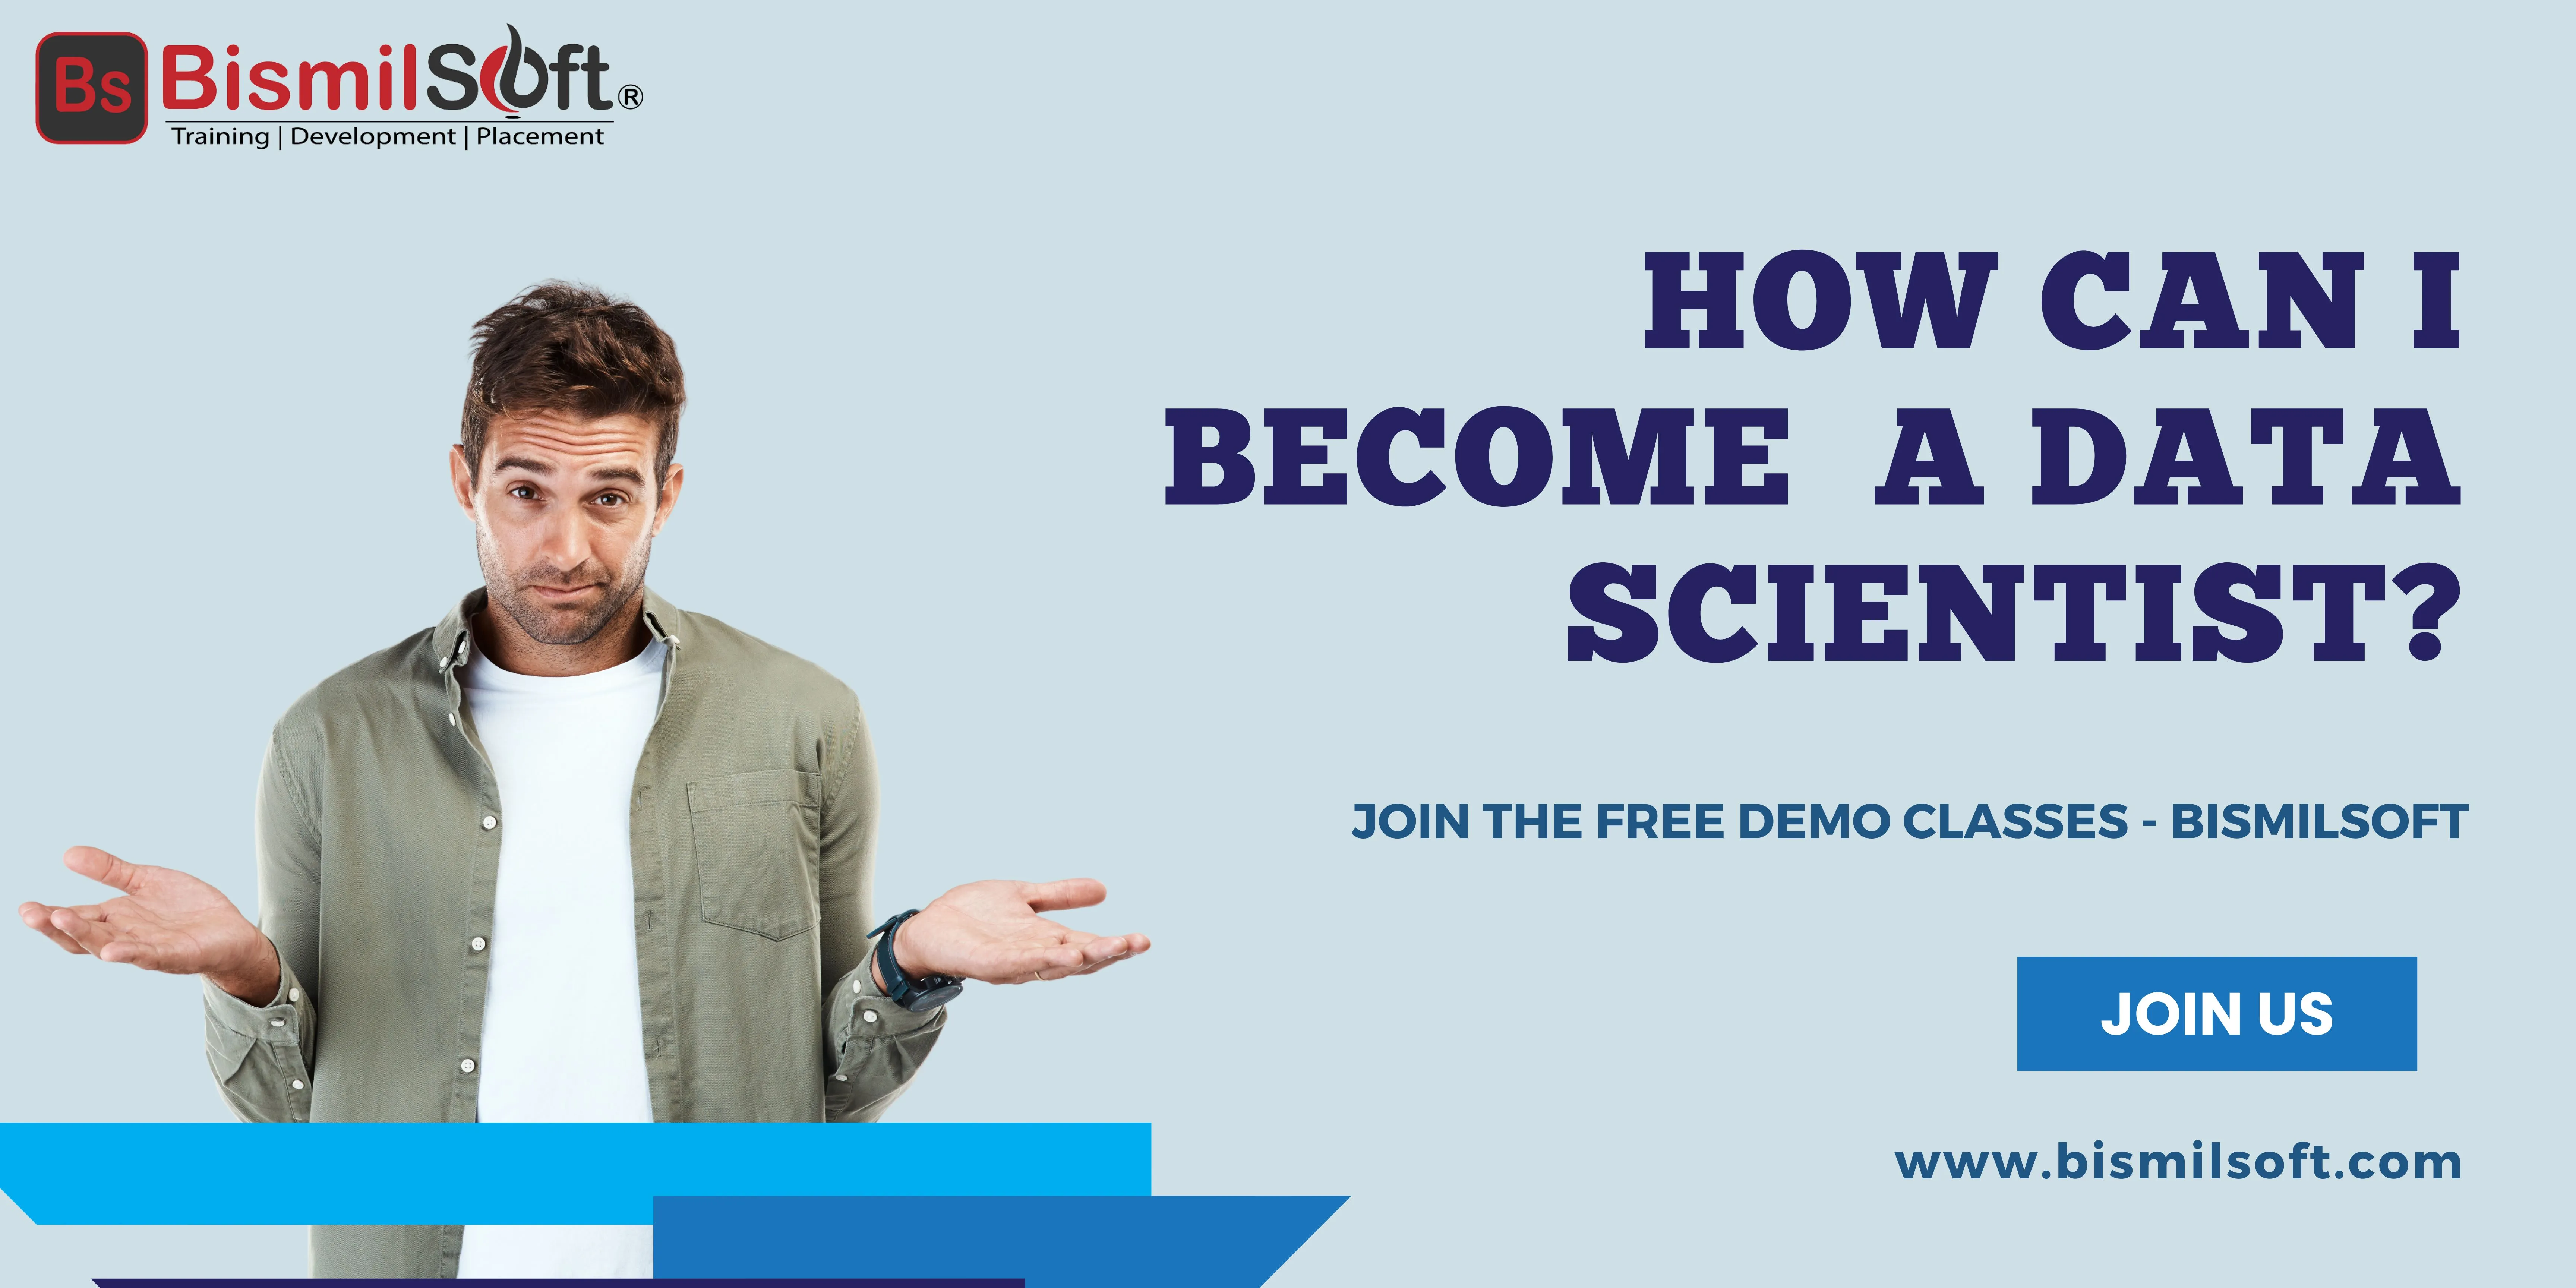 How Can I Become a Data Scientist?